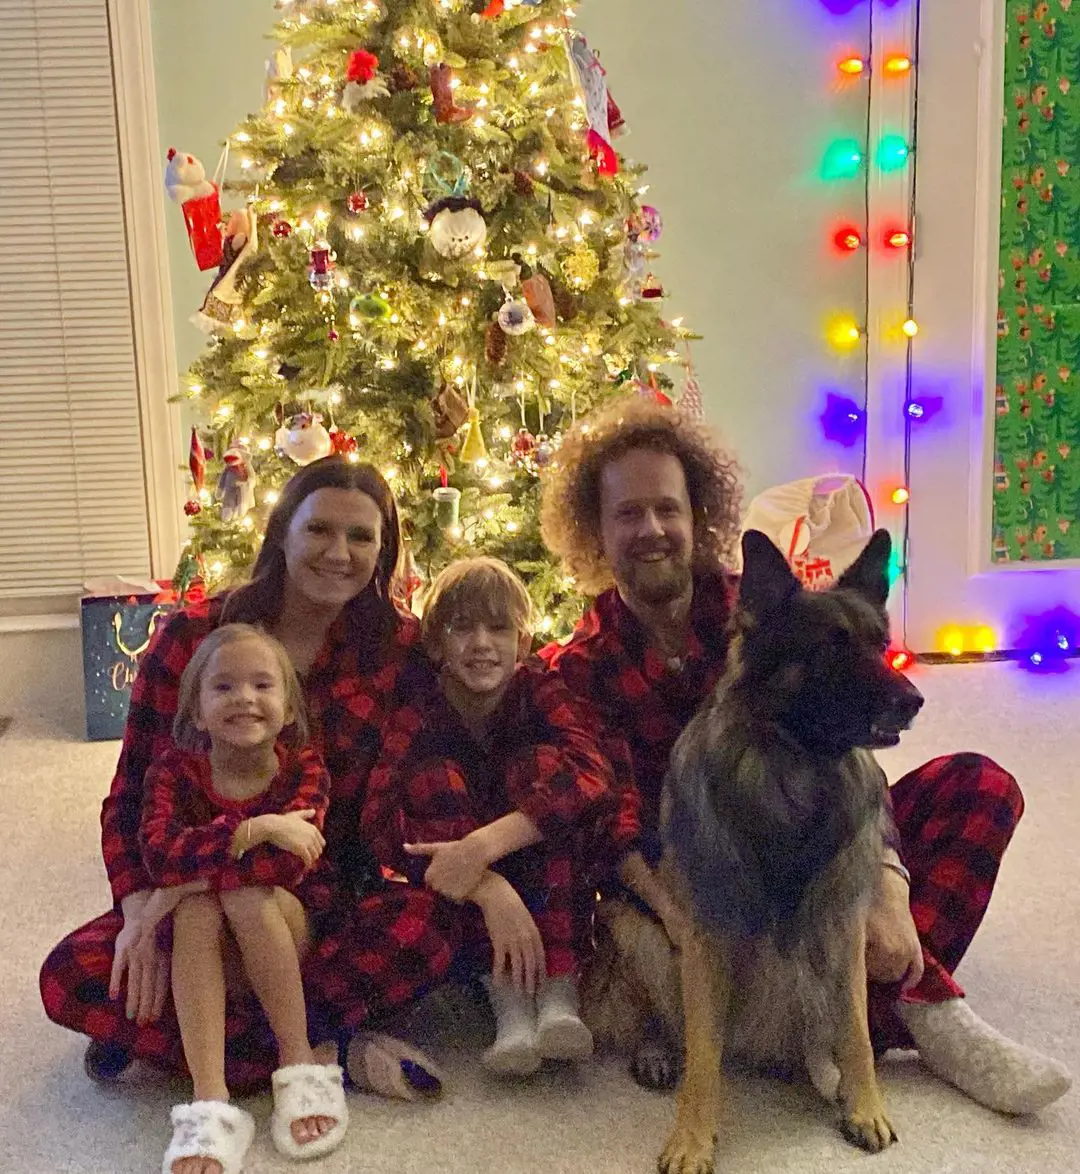 Kyle, Breanna, and her kids celebrated Christmas 2022 together.